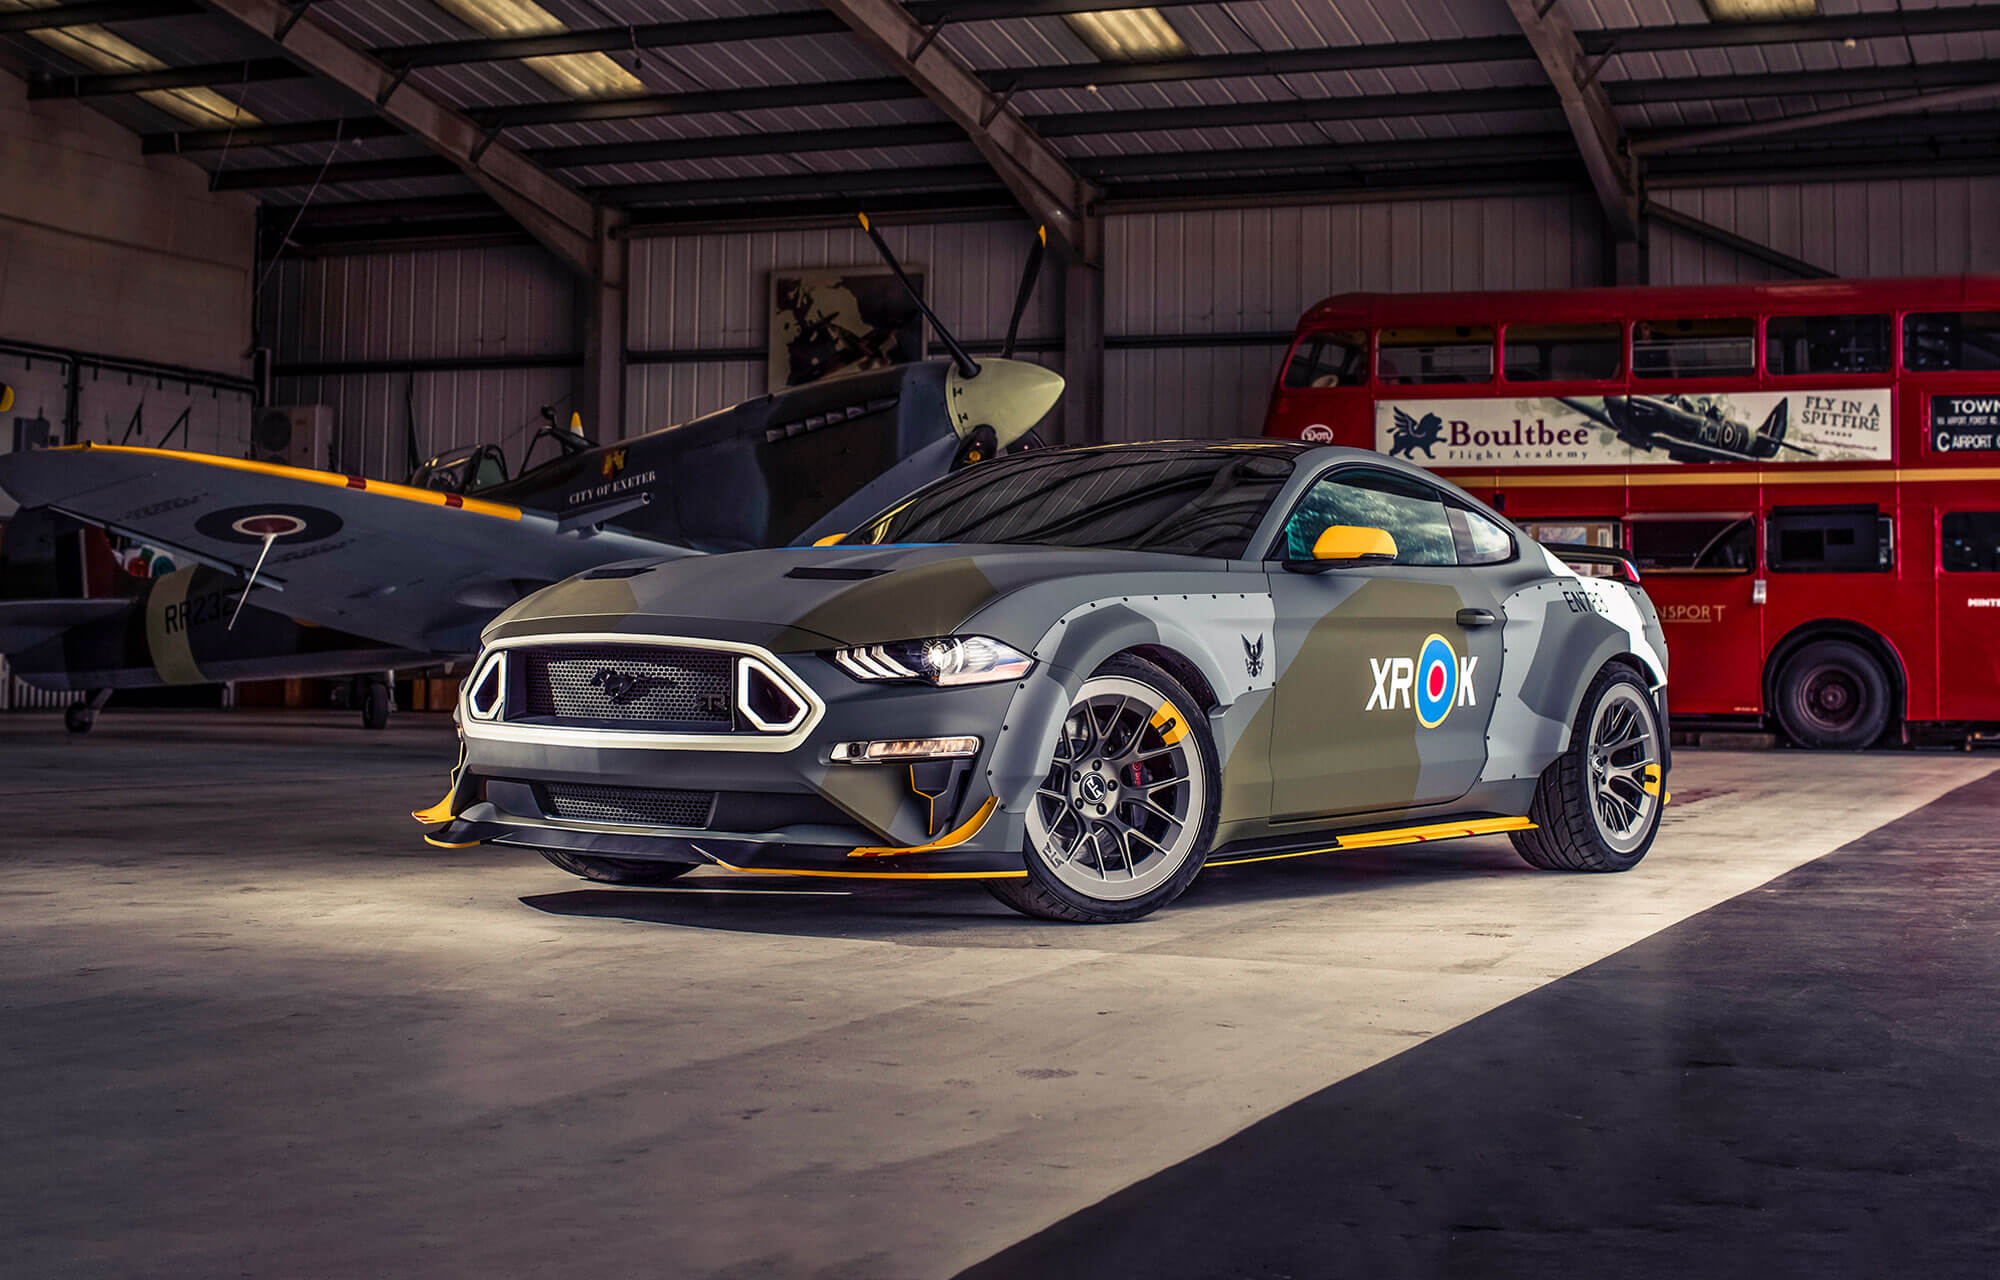 Ford Will Auction Off This Mustang Inspired by RAF Fighters From